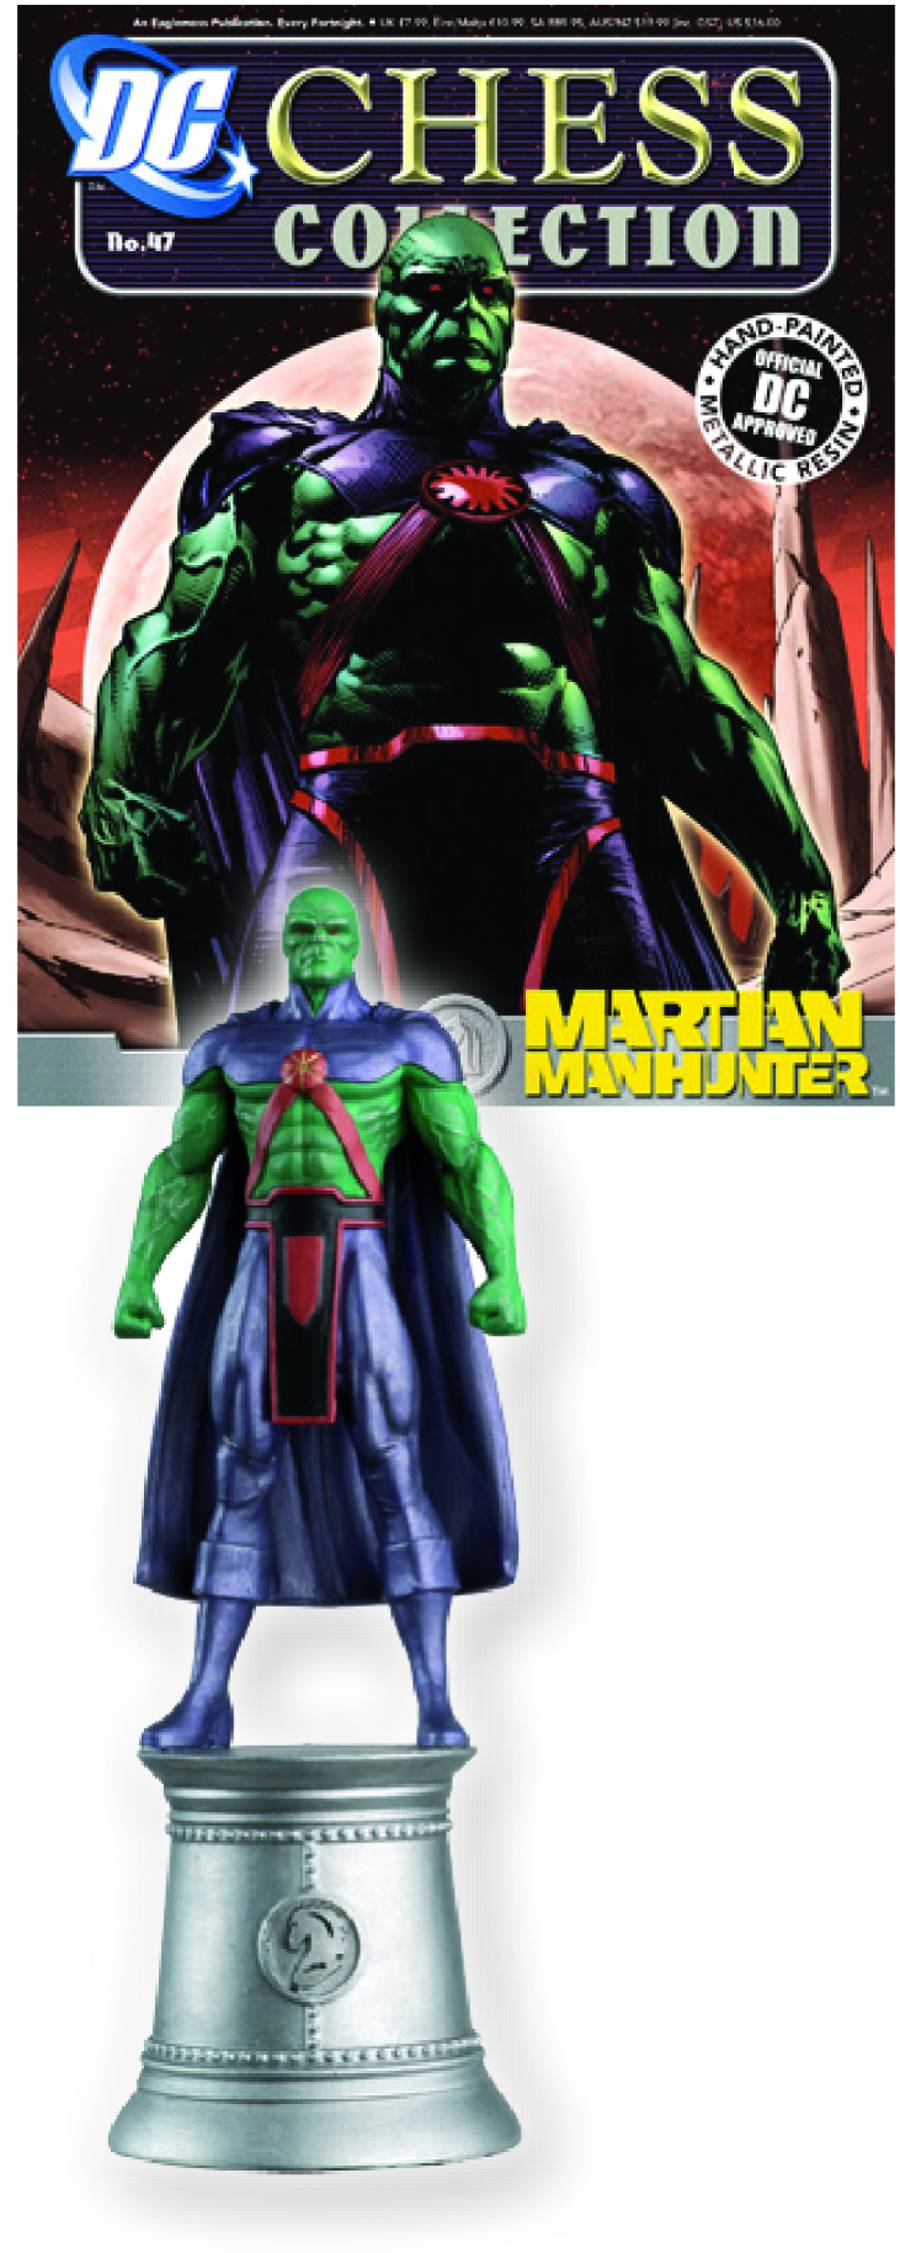 DC Superhero Chess Fig Collected Mag #47 Martian Manhunter White Knight